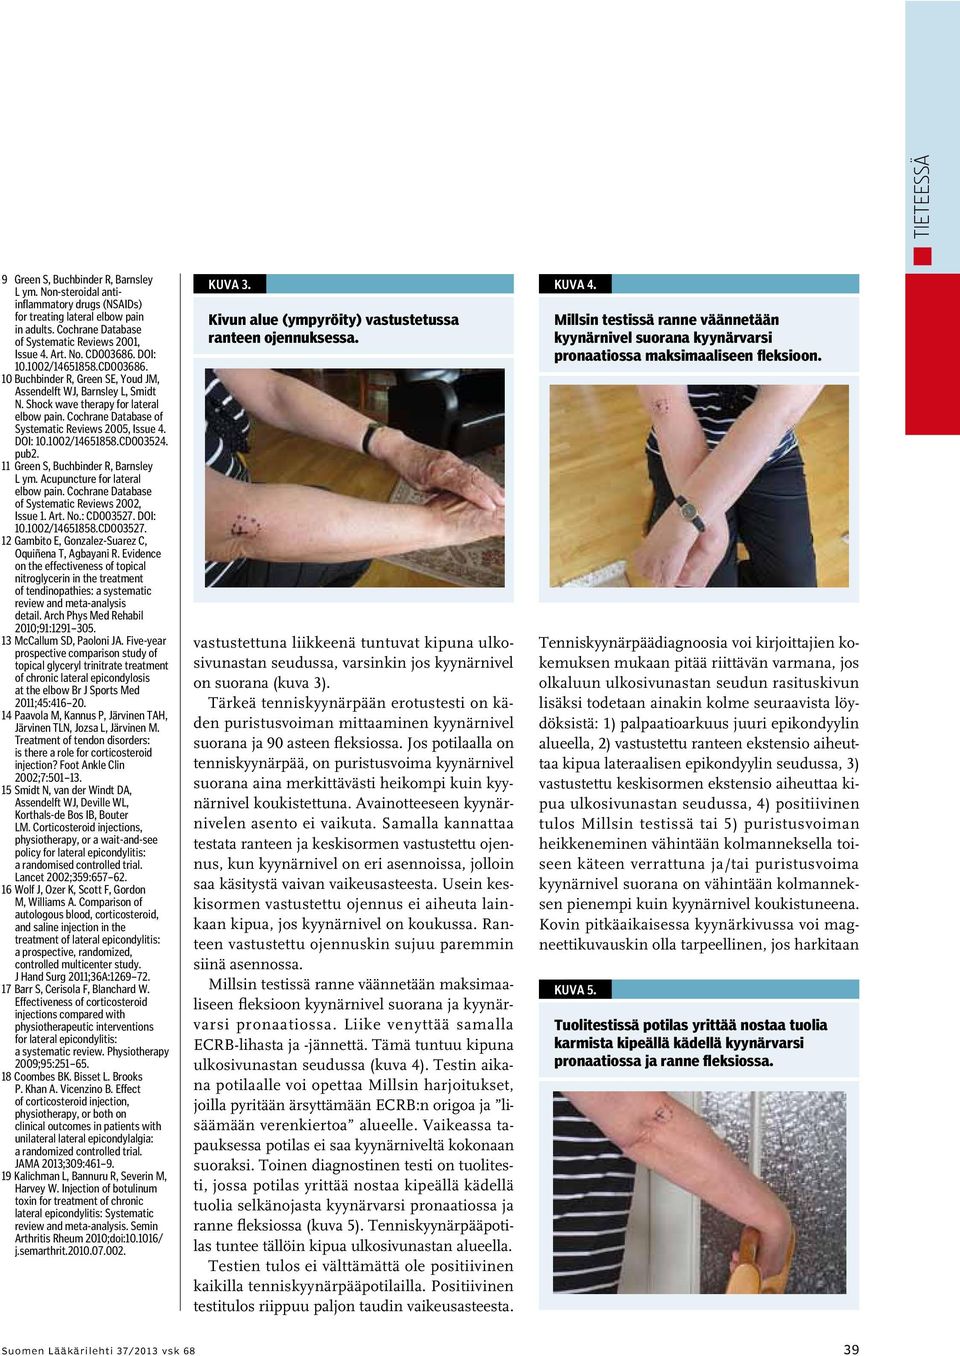 Cochrane Database of Systematic Reviews 2005, Issue 4. DOI: 10.1002/14651858.CD003524. pub2. 11 Green S, Buchbinder R, Barnsley L ym. Acupuncture for lateral elbow pain.